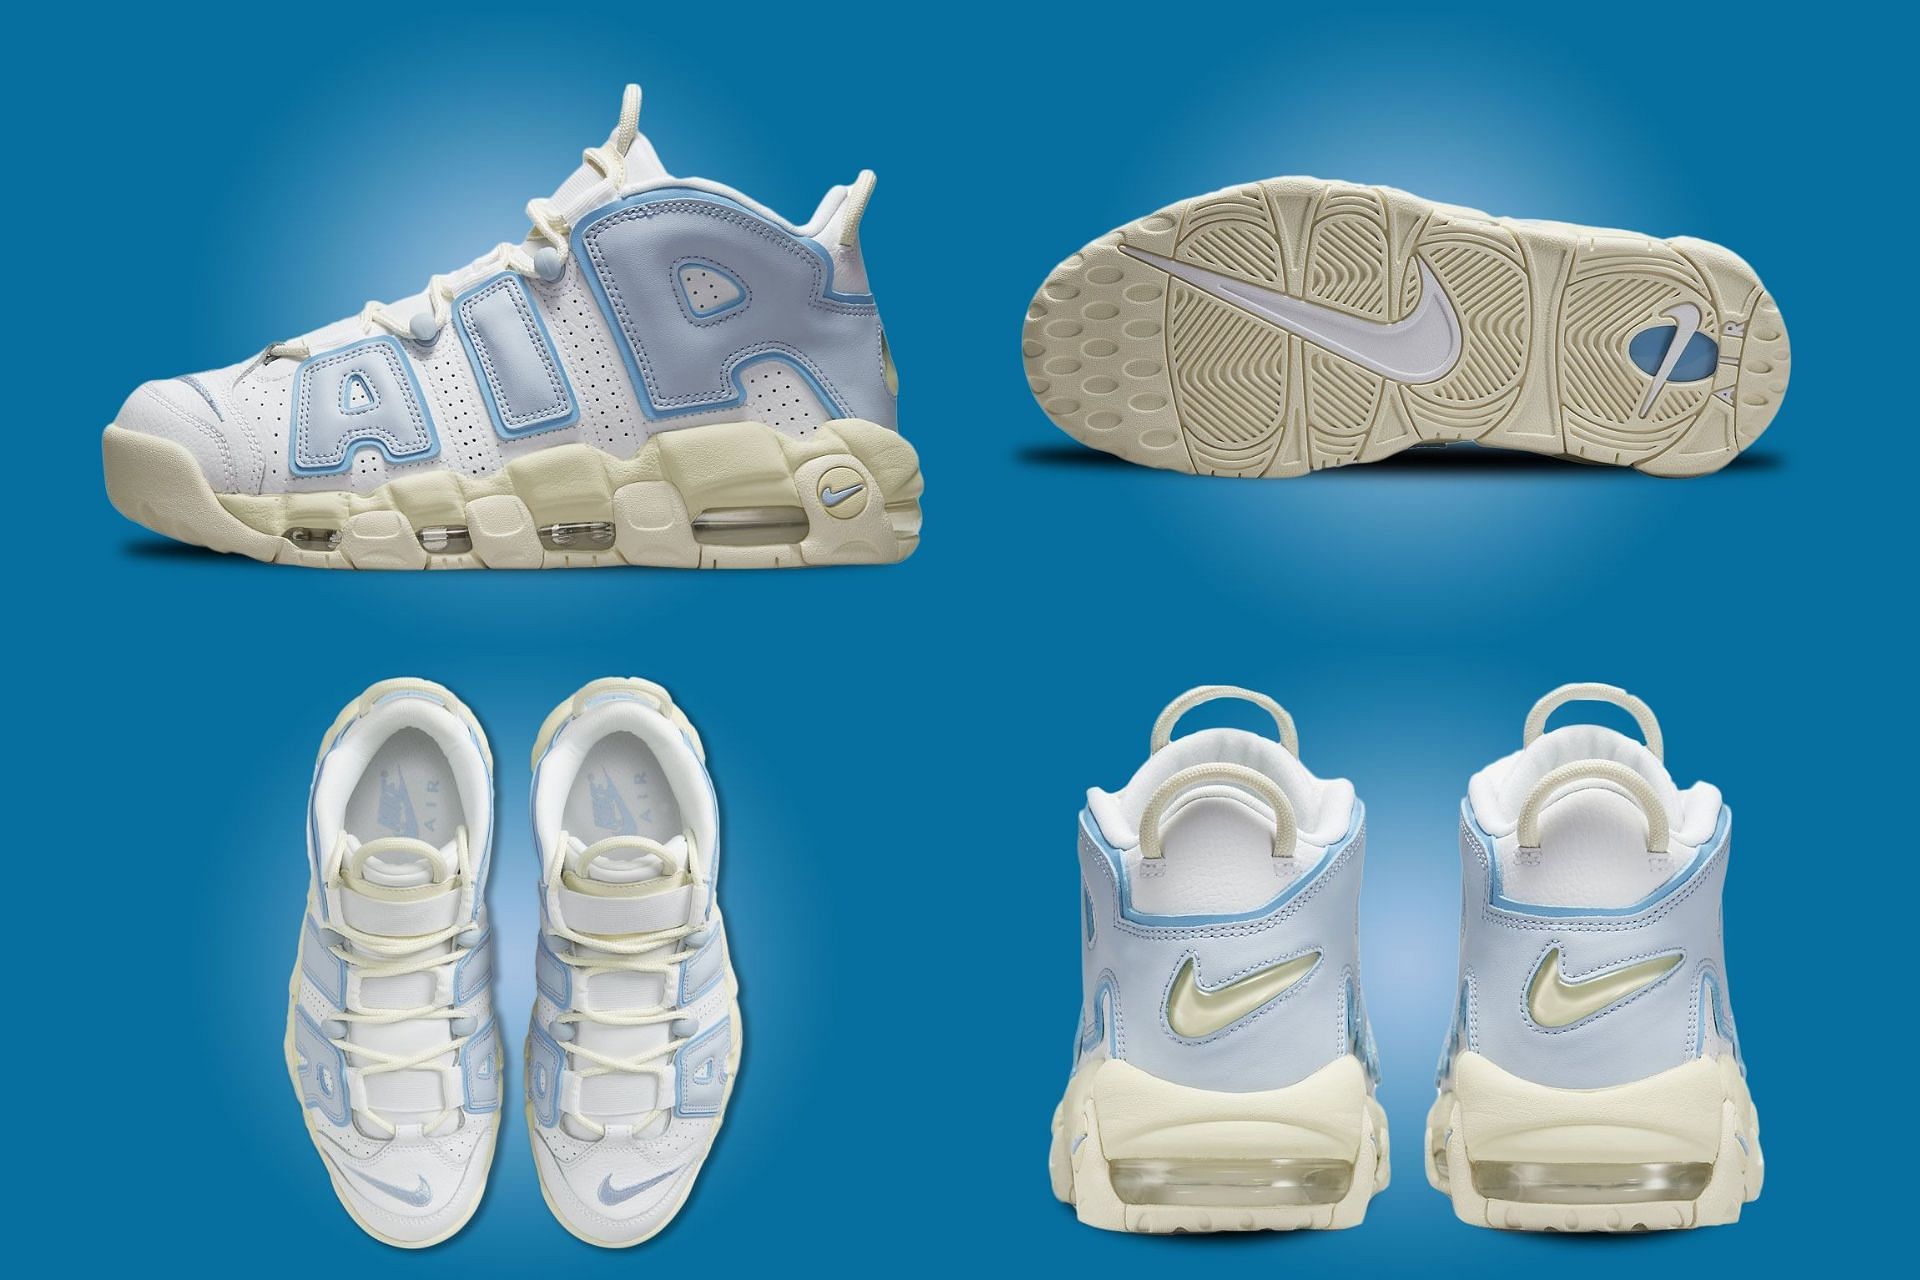 to buy Nike Air Uptempo “White Ocean Bliss” shoes? Price more details explored